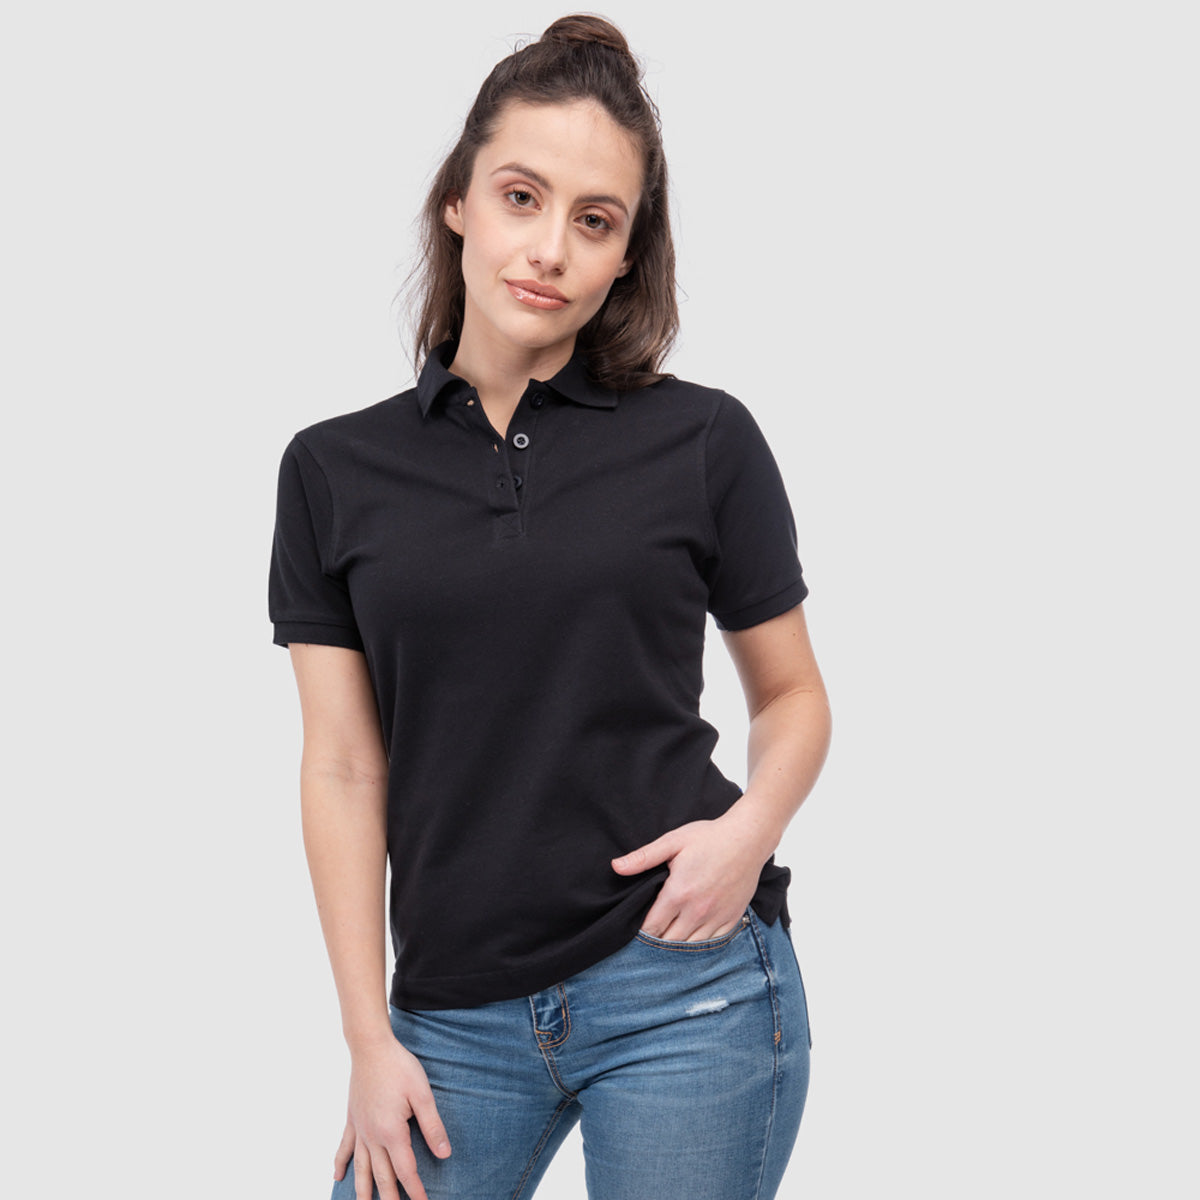 polo, polo shirt, polo store, ralphlauren, polo t shirts, golf polo, golf shirts, golf t shirt, polo shirt ladies, work outfit, outfits, black polo